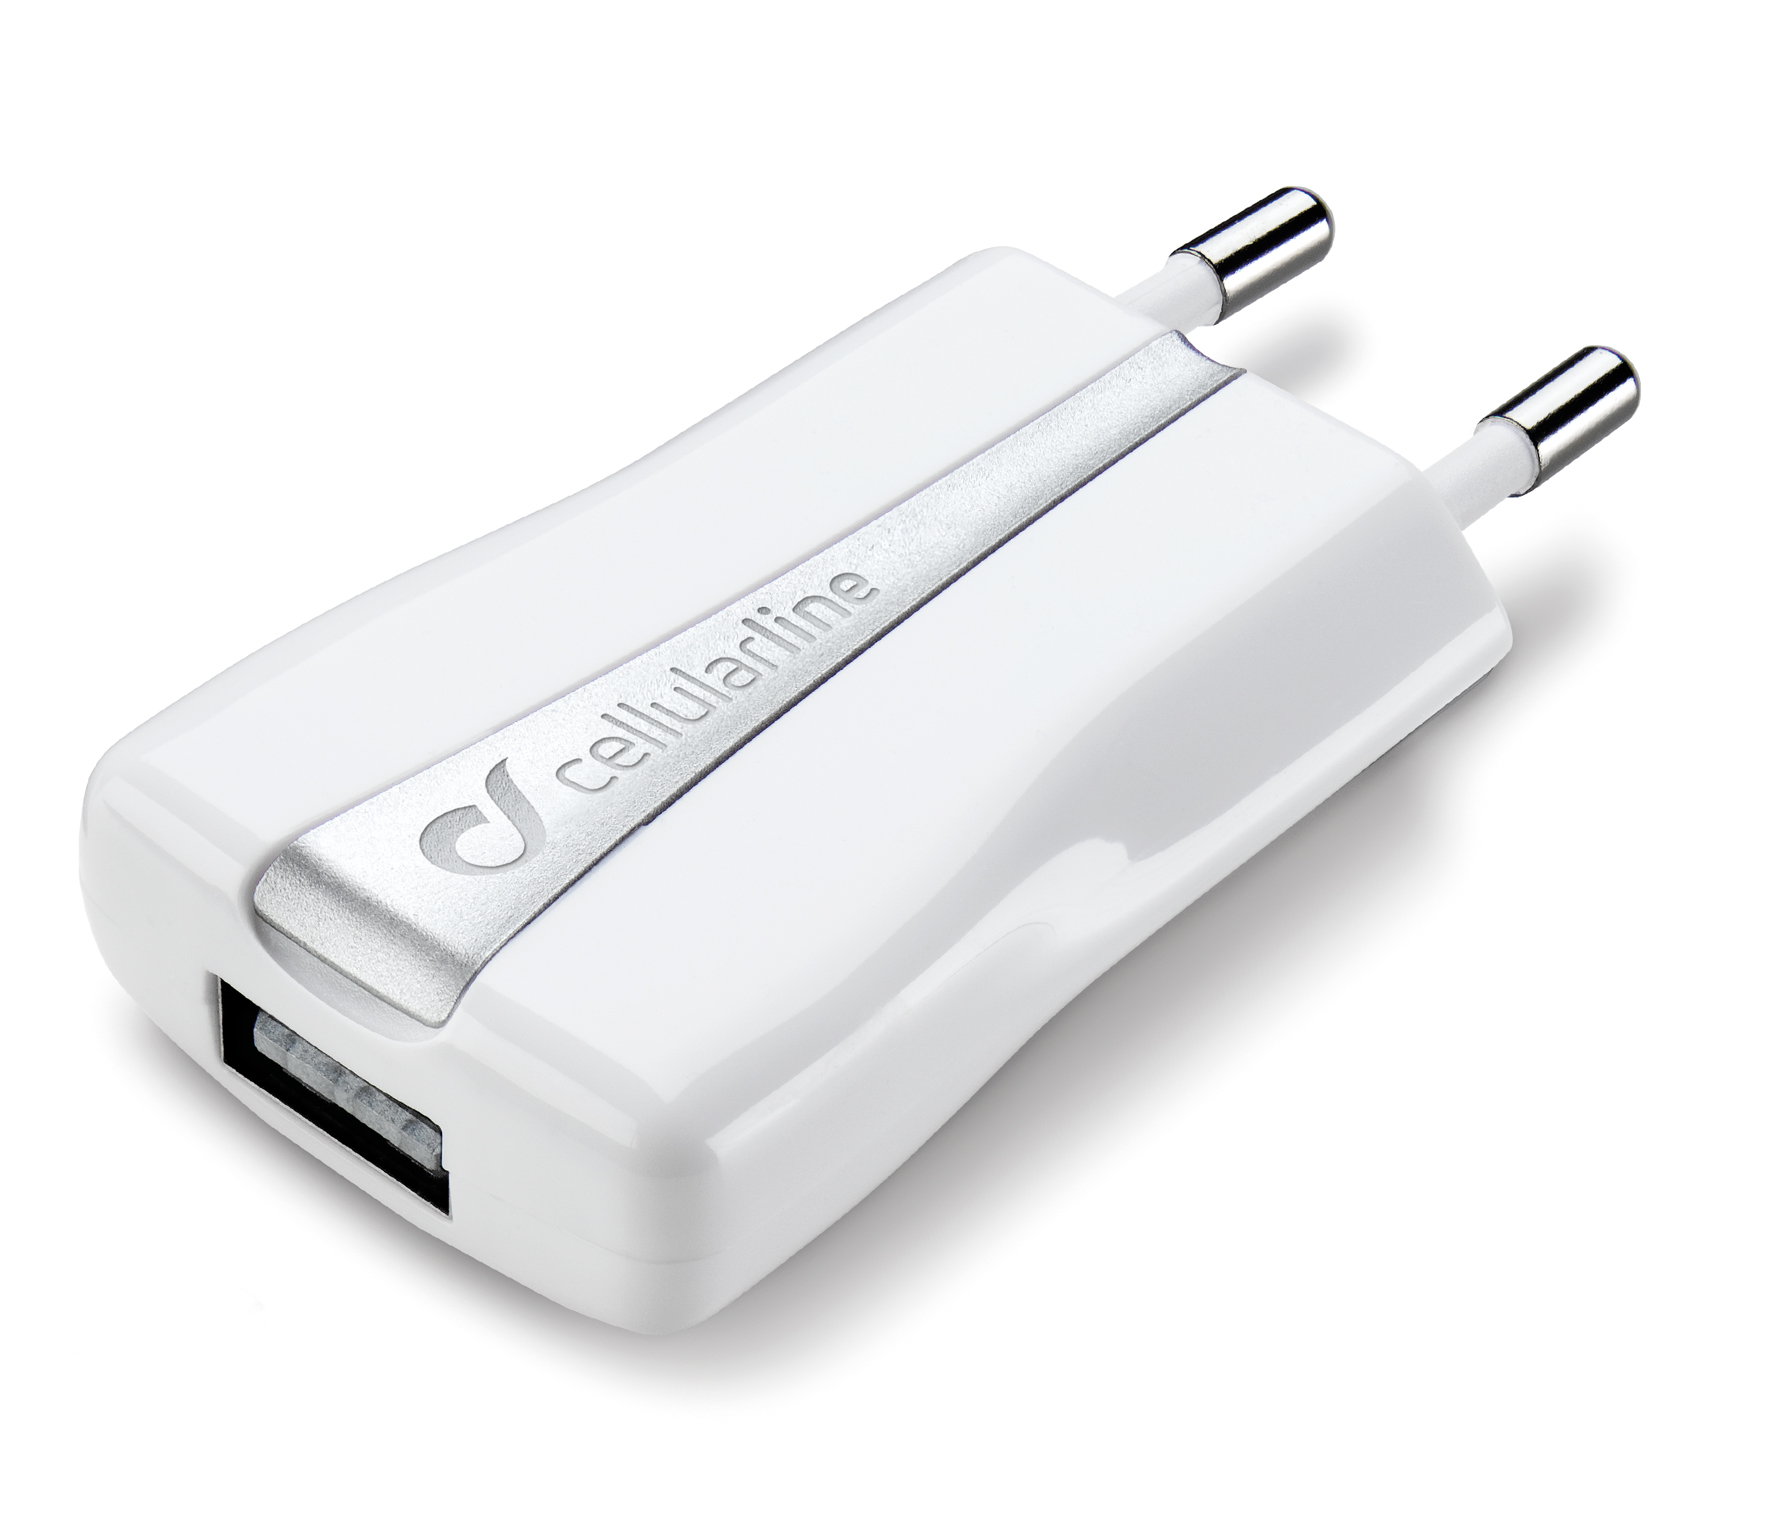 Travel charger usb, 5W/1A Apple, white